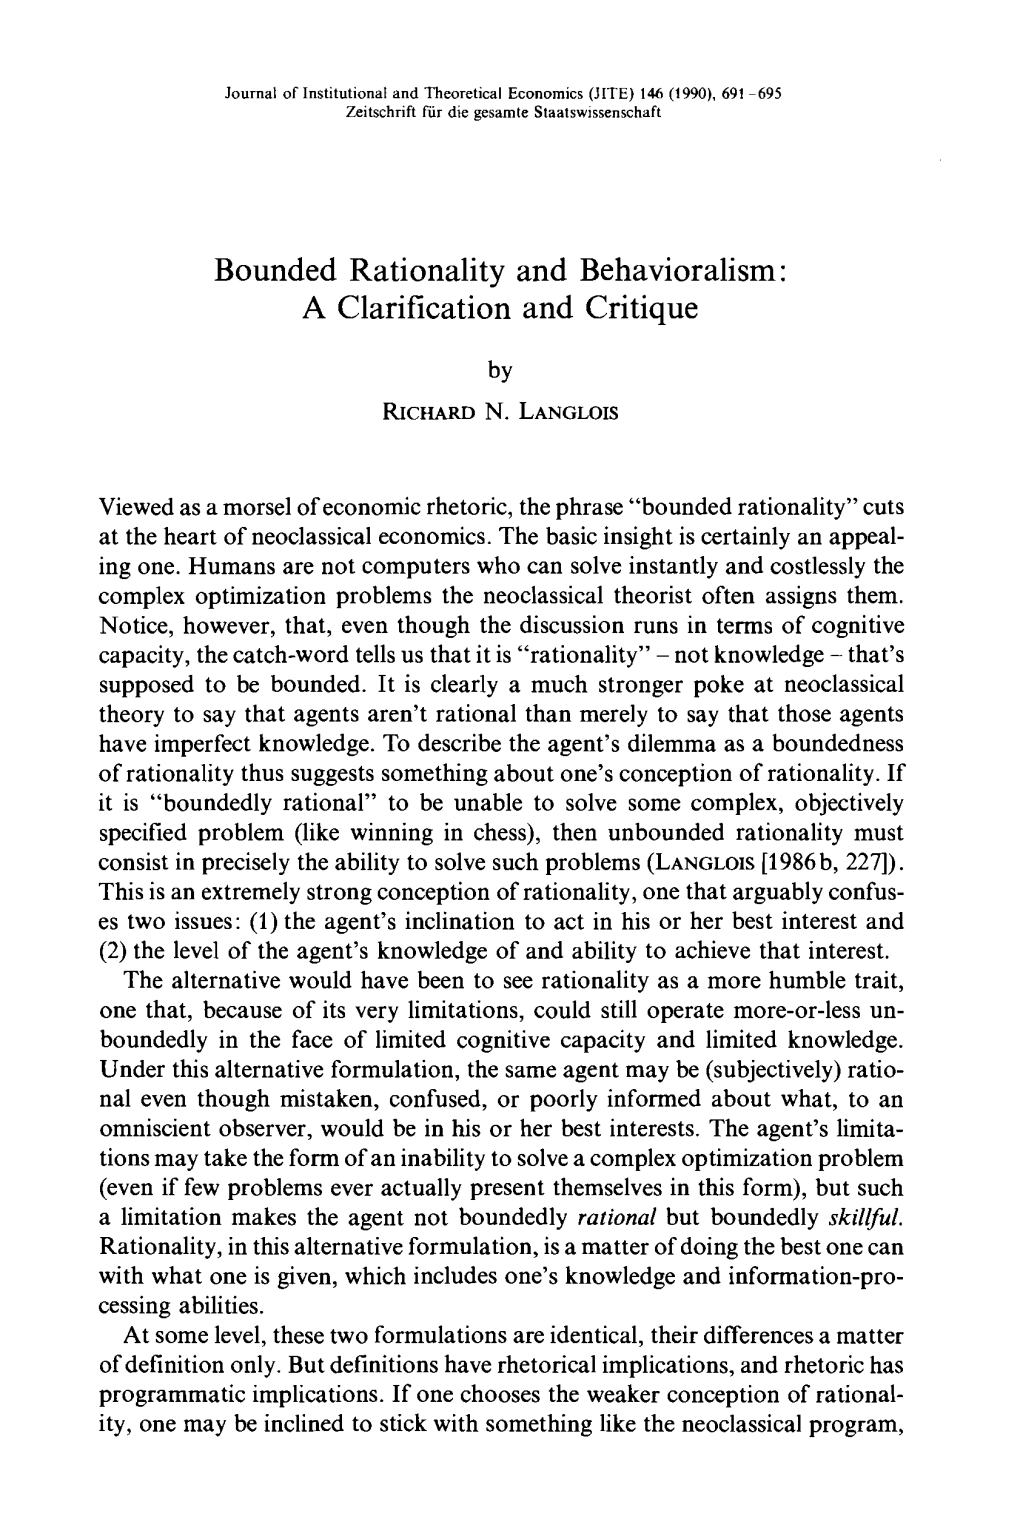 Bounded Rationality and Behavioralism: a Clarification and Critique